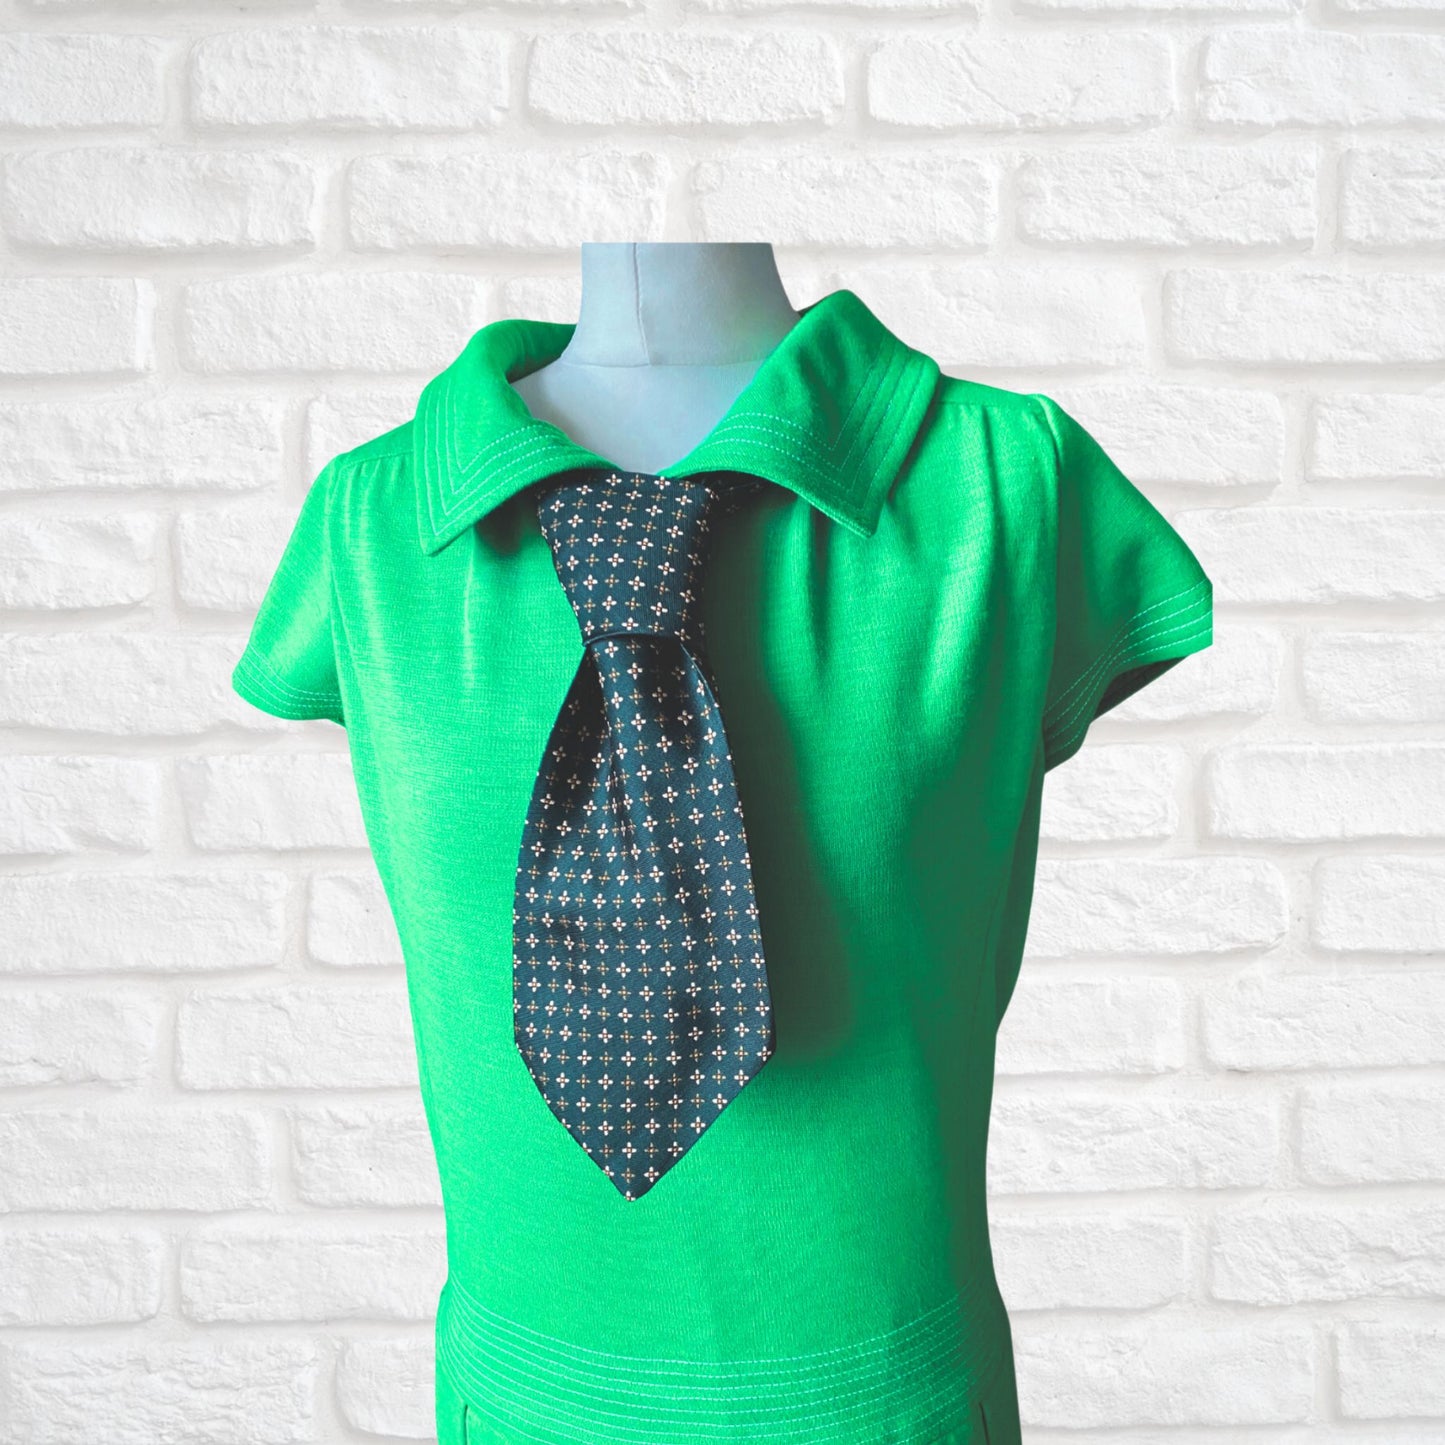 Bright Green Short Sleeved 60s Scooter Dress with Pleated Skirt .Approx UK  size 8-10